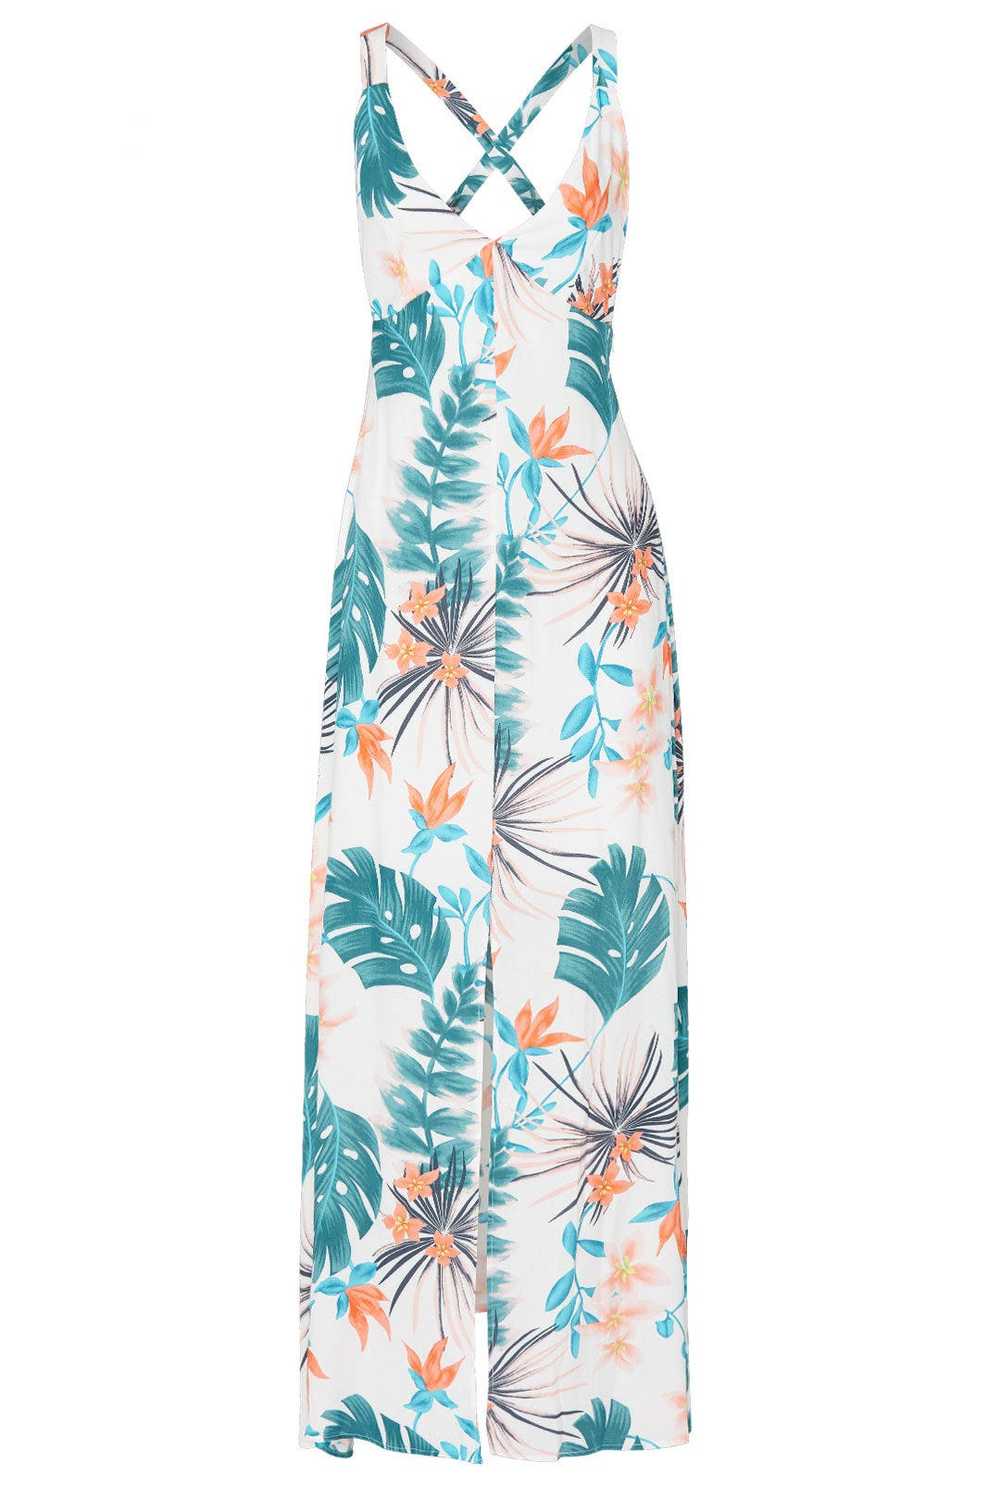 Slate & Willow Palm Printed Maxi - image 5